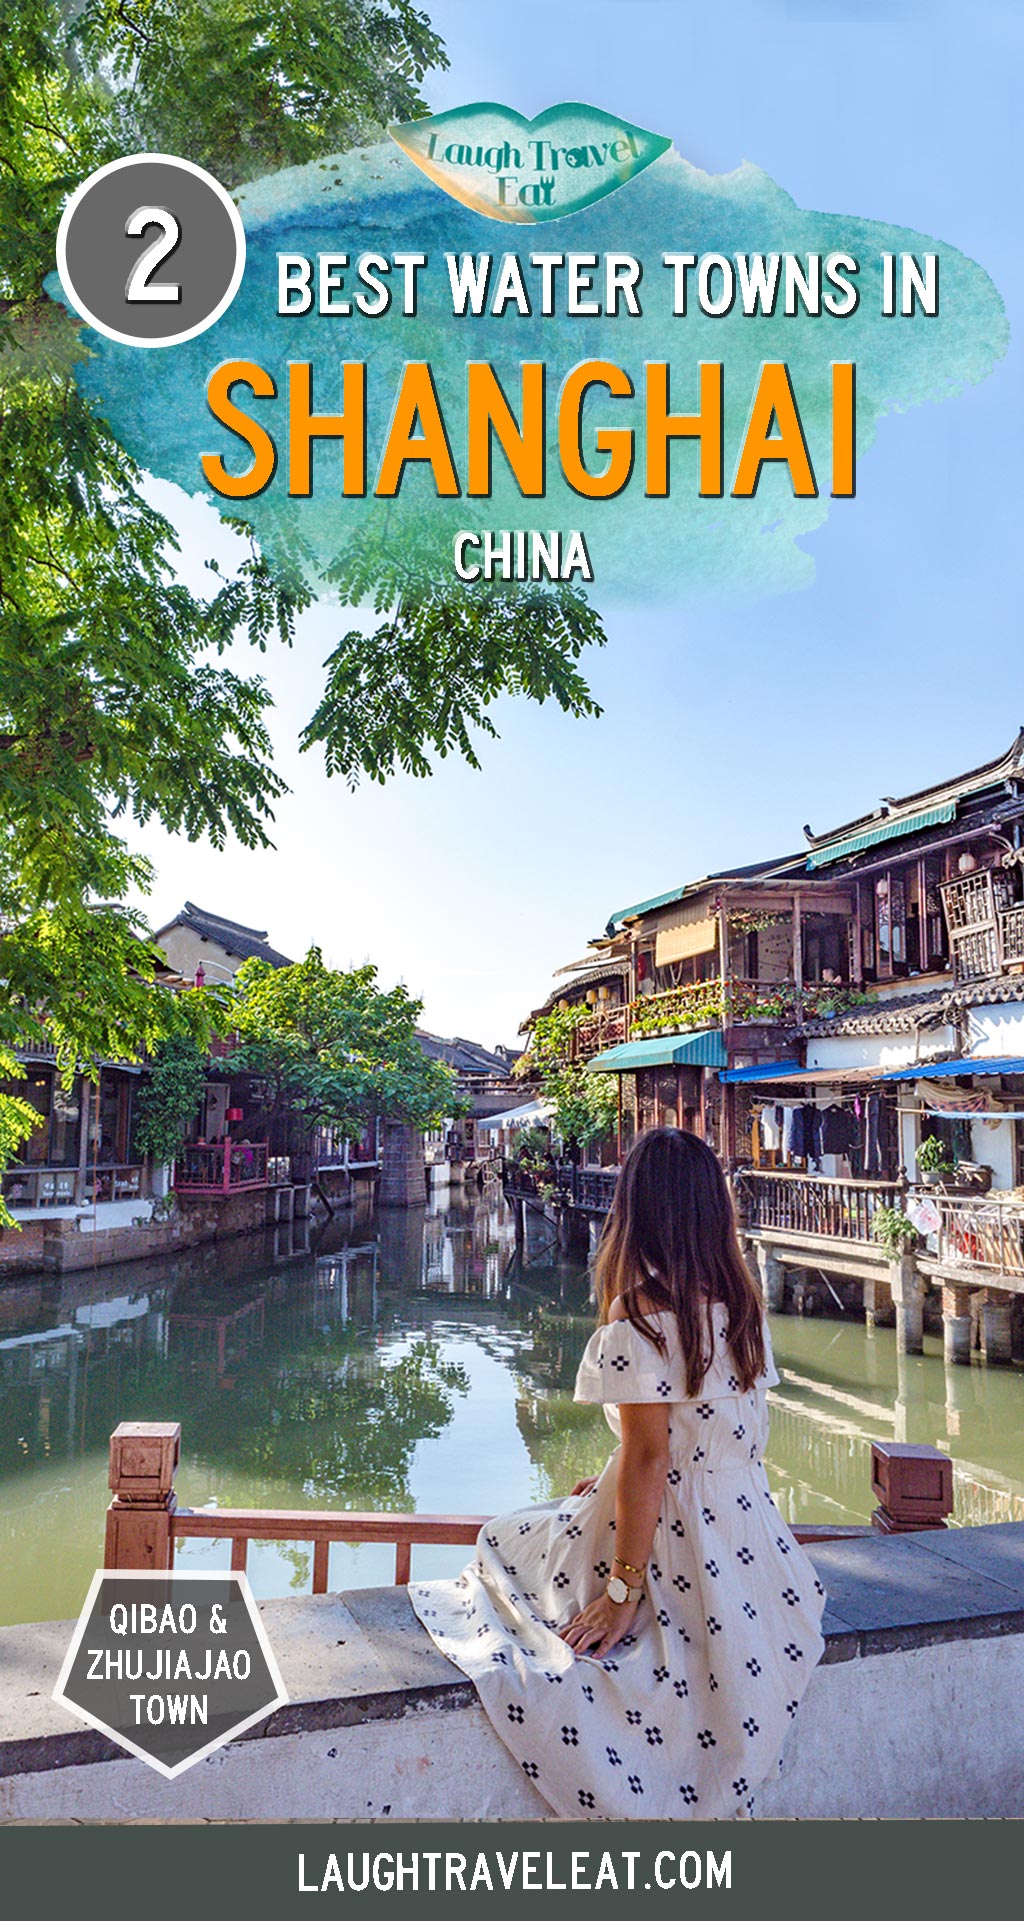 Shanghai was historically an area that flourished from water trade with many water towns. With dozens to choose from, two of the most popular are Zhujiajiao and Qibao. Here’s all you need to know about each and how to choose between them: #Shanghai #watertown #China